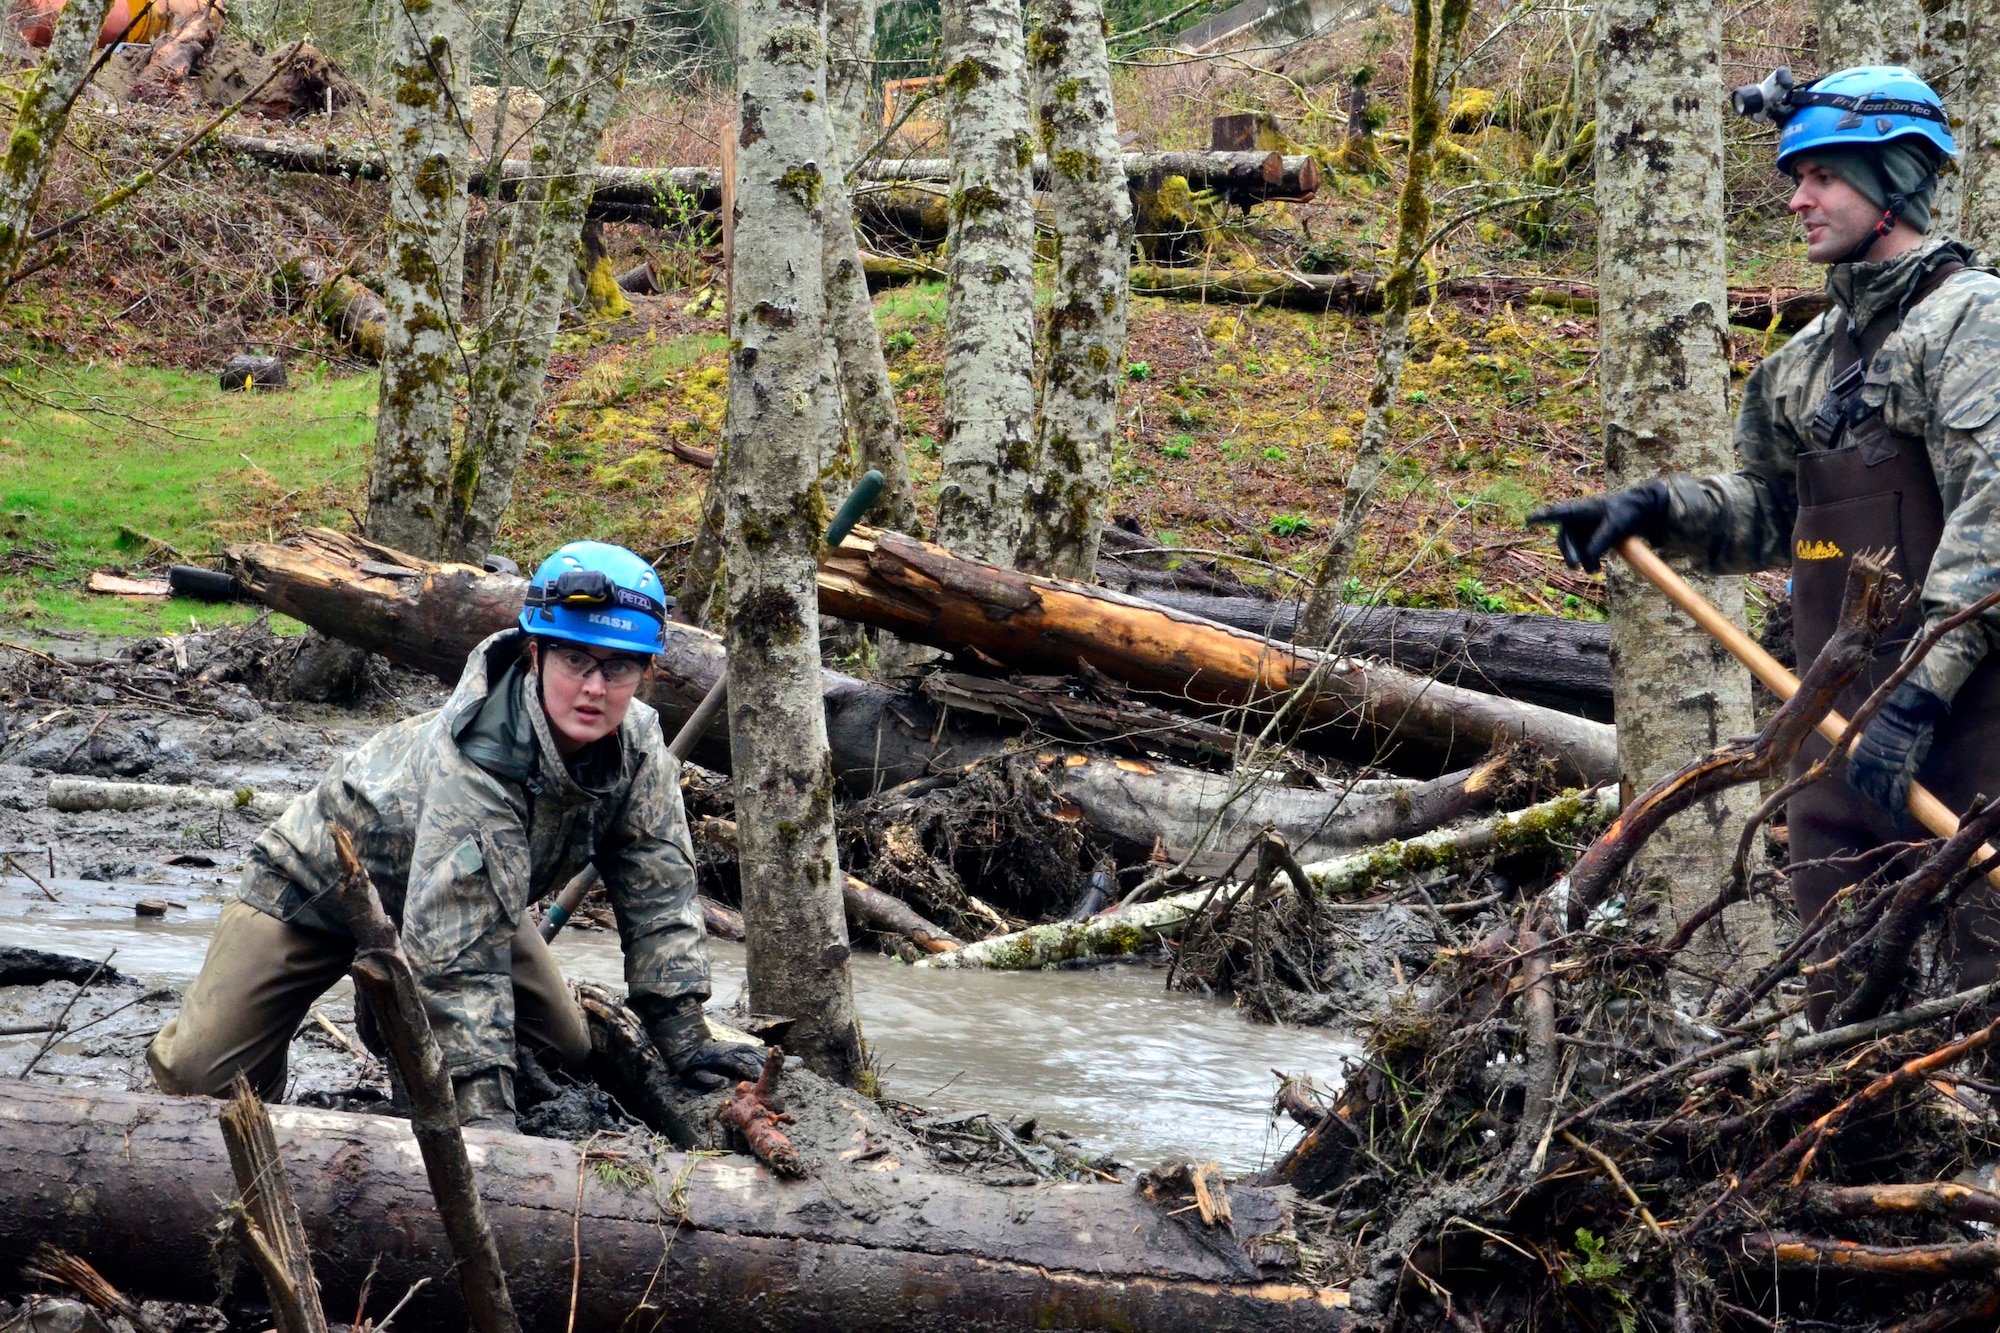 U.S. Air National Guard Capt. Nicole Stefaniak, then a Senior Airman, clears mud and debris to drain the water to assist in the search for survivors in Oso, Wash., March 30, 2014, following a deadly landslide. Stefaniak is now assigned to the Washington Air National Guard's Western Air Defense Sector and is currently volunteering for her third emergency response support to Washington state during the COVID-19 pandemic. (U.S. Army National Guard photo by Sgt. Rory Feathers)